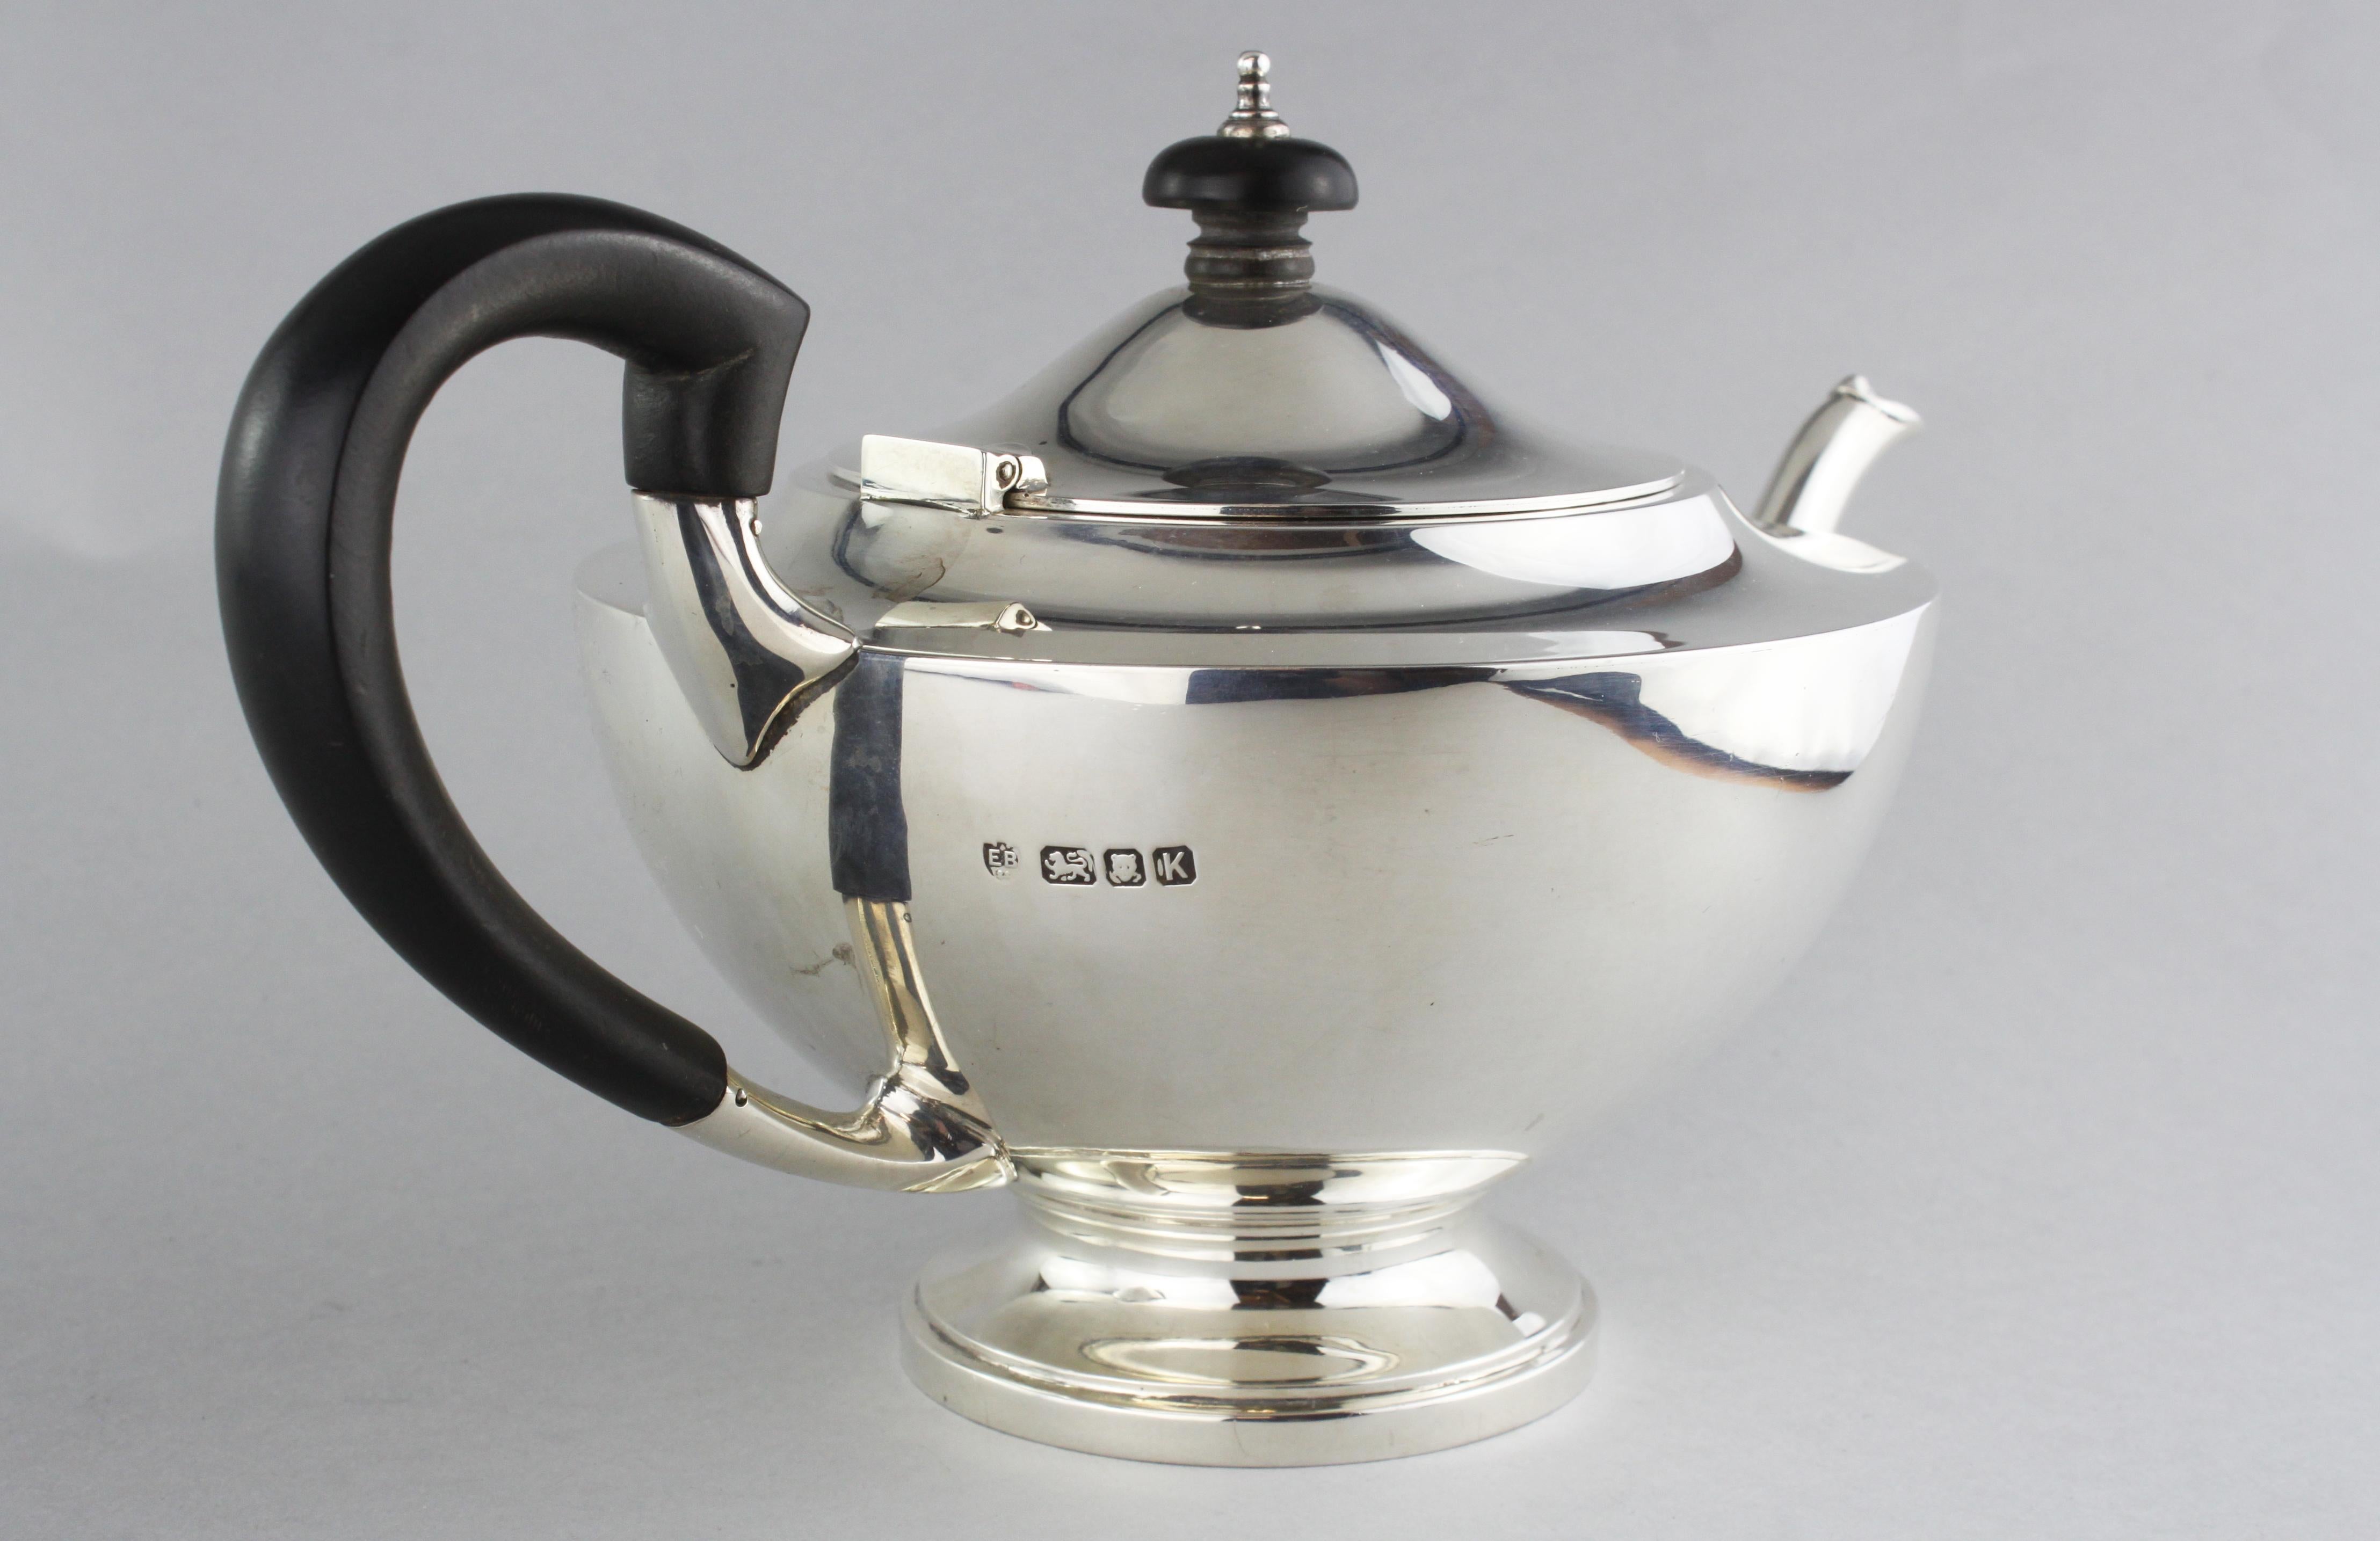 Vintage solid silver tea pot by Edward Barnard & Sons Ltd
Maker: Edward Barnard & Sons Ltd
Made in London 1945
Fully hallmarked.

Dimensions - 
Weight 549g
Height 15cm
Width at its widest point 14cm

Condition : Tea pot is pre-owned, has